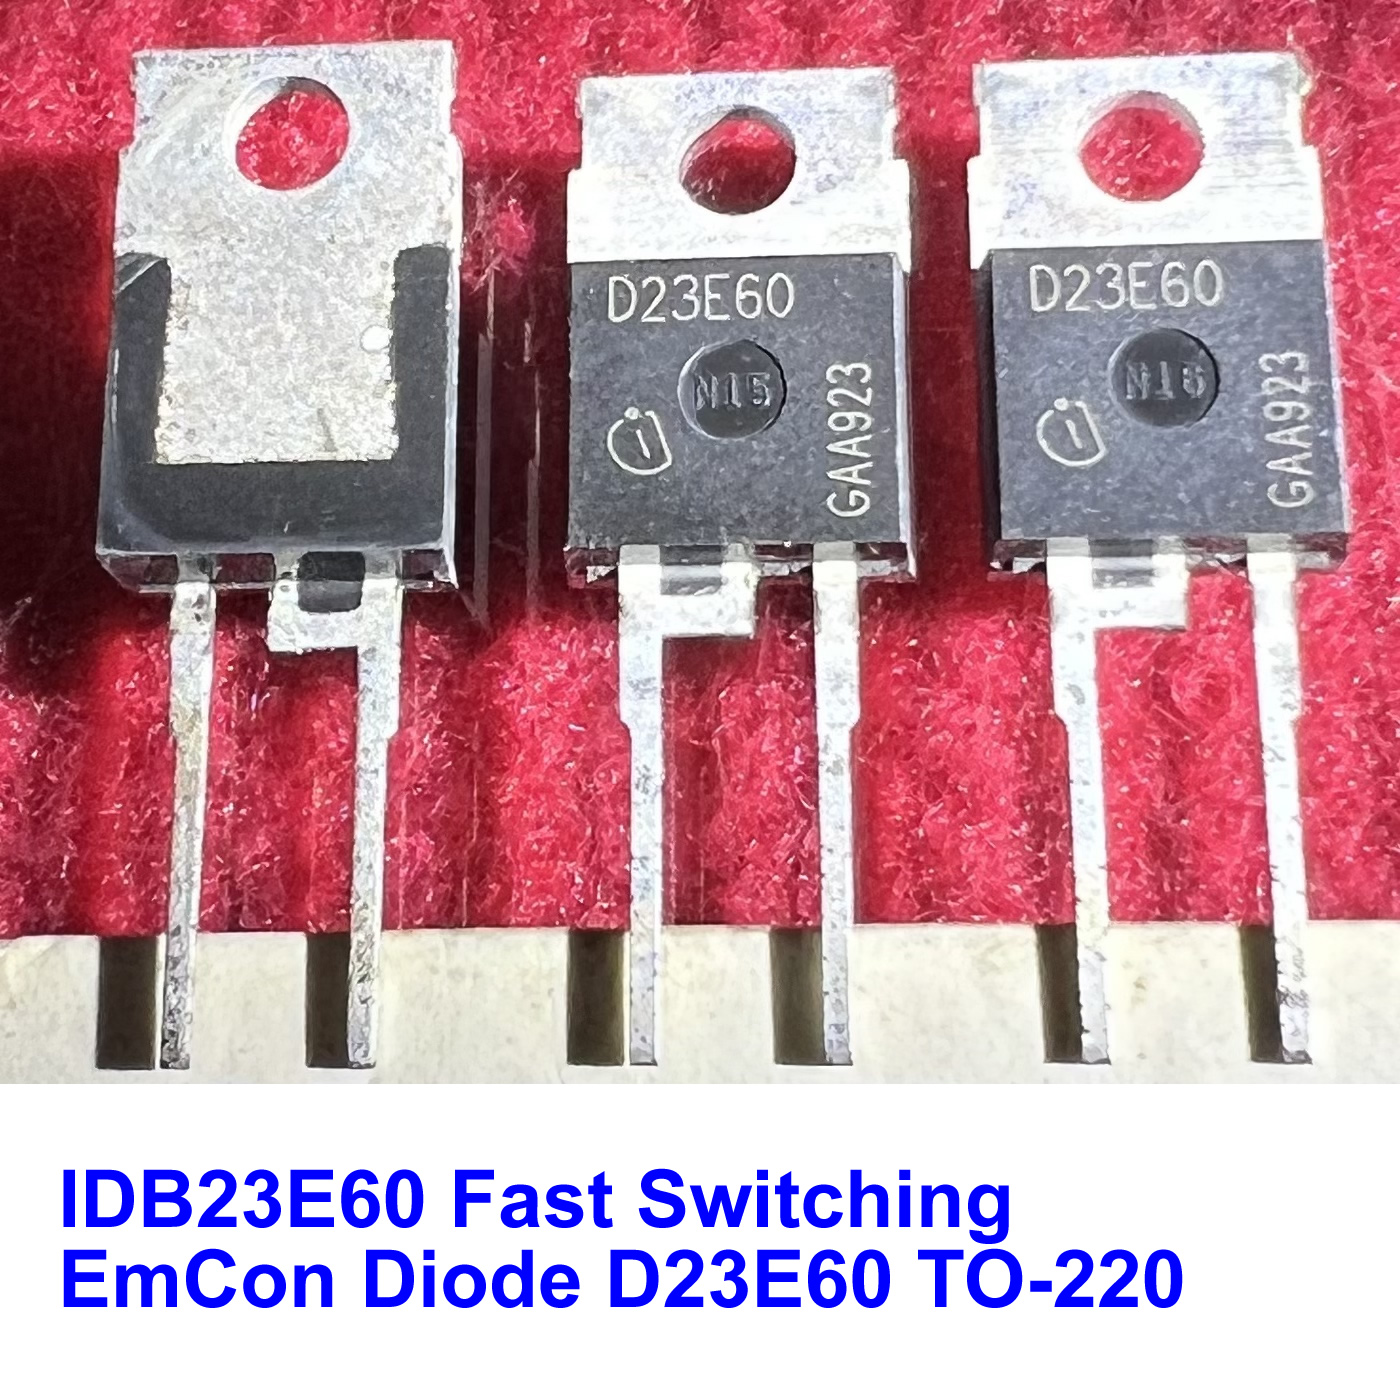 IDB23E60 Fast Switching EmCon Diode D23E60 TO-220